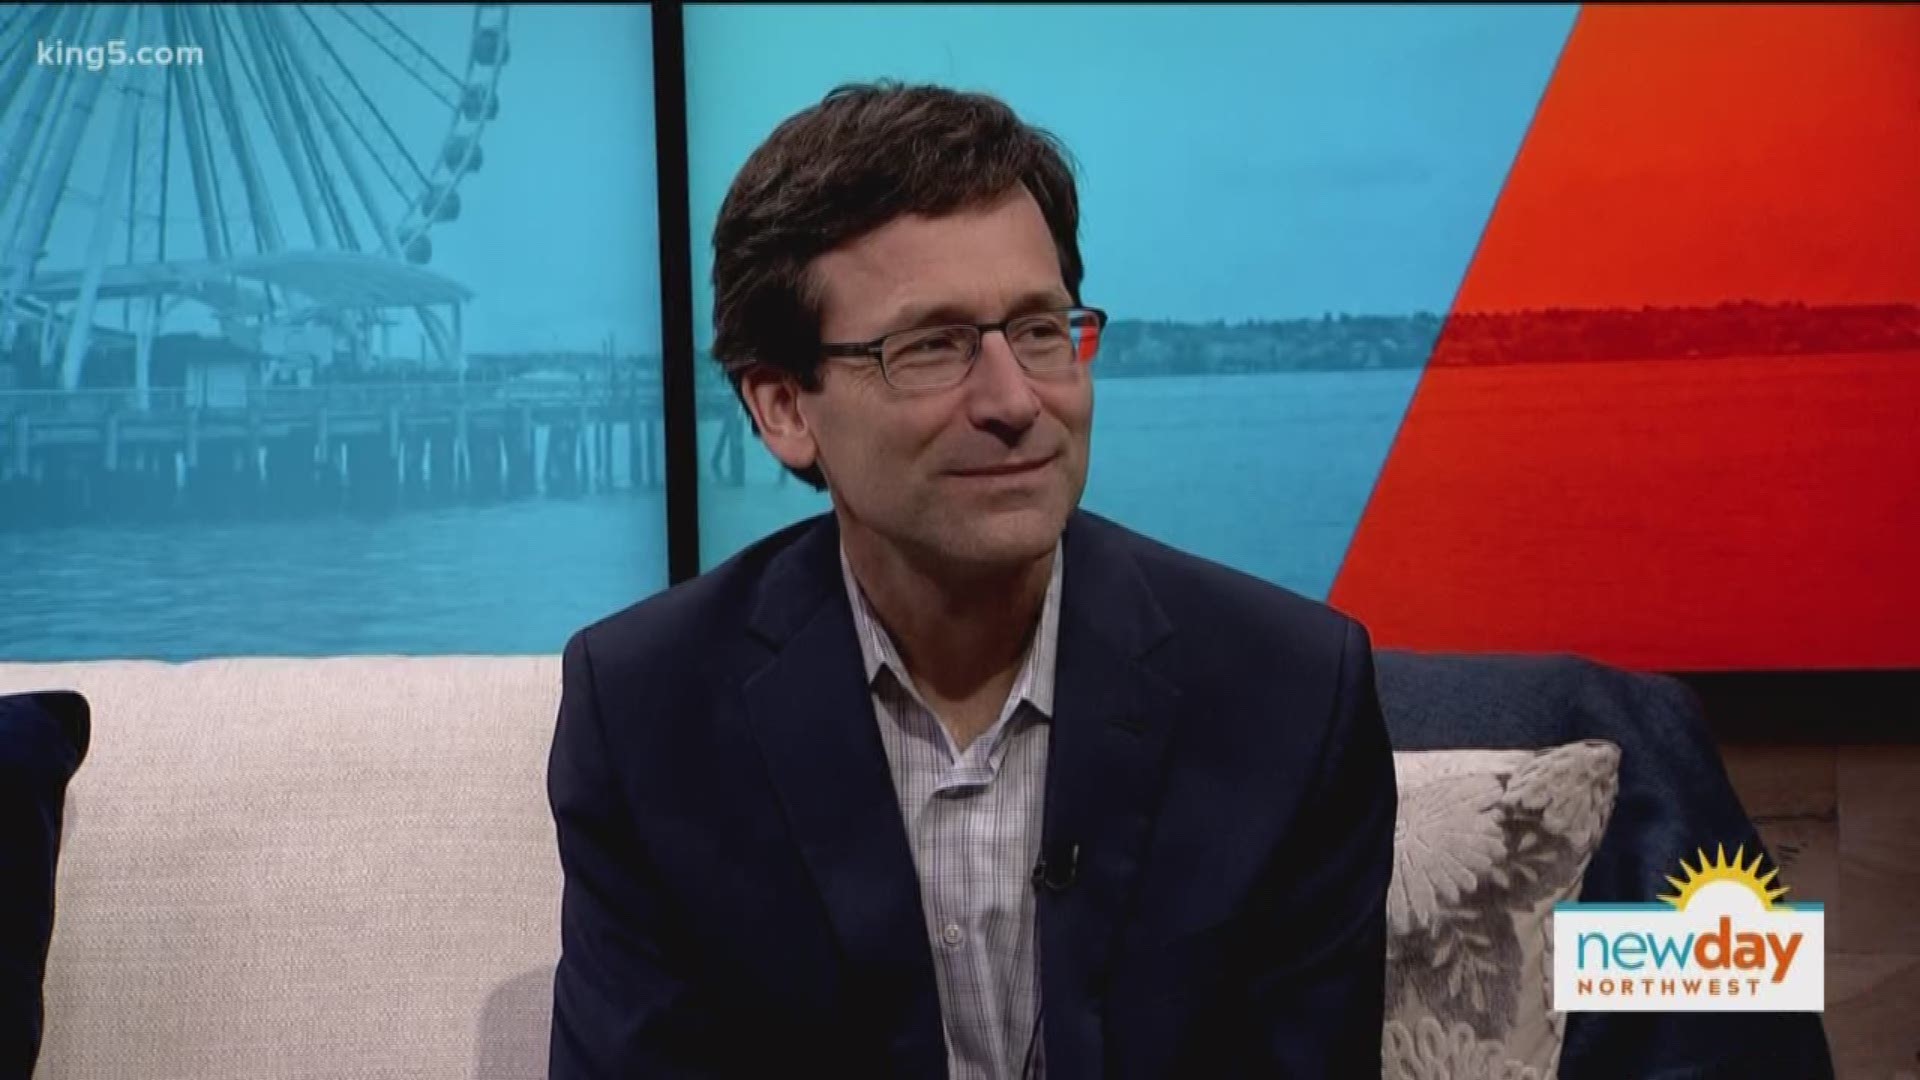 We go over new laws taking effect this January that could effect you with Attorney General Bob Ferguson.